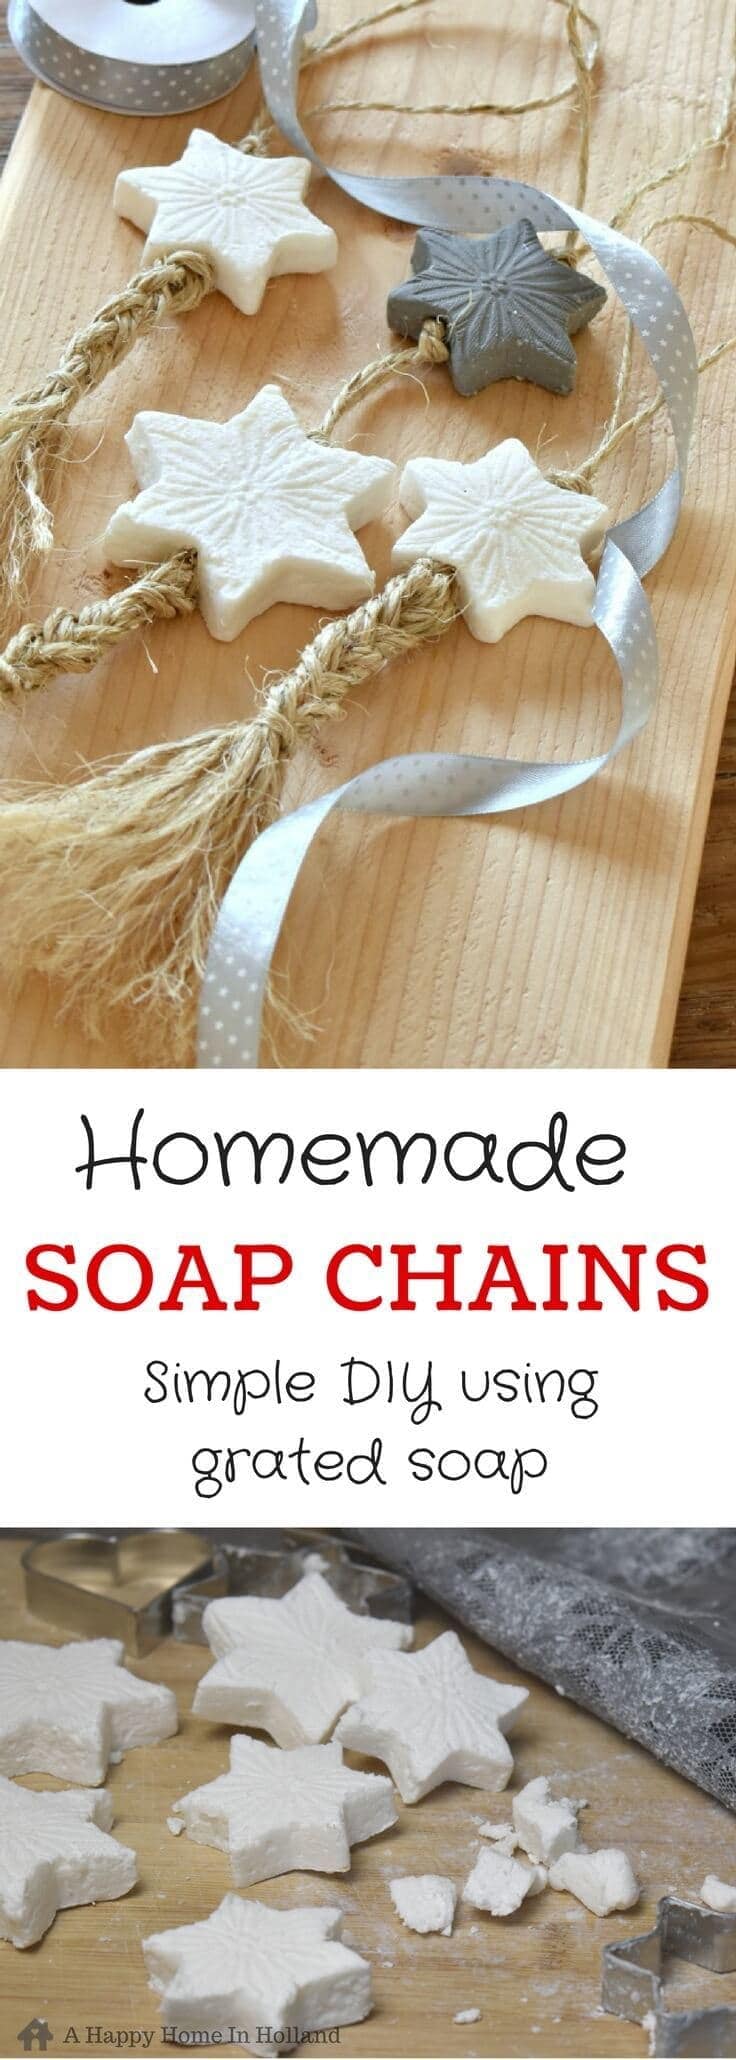 DIY Handmade Soap Chains - learn how to make this simple but stylish gift idea in an easy step by step tutorial